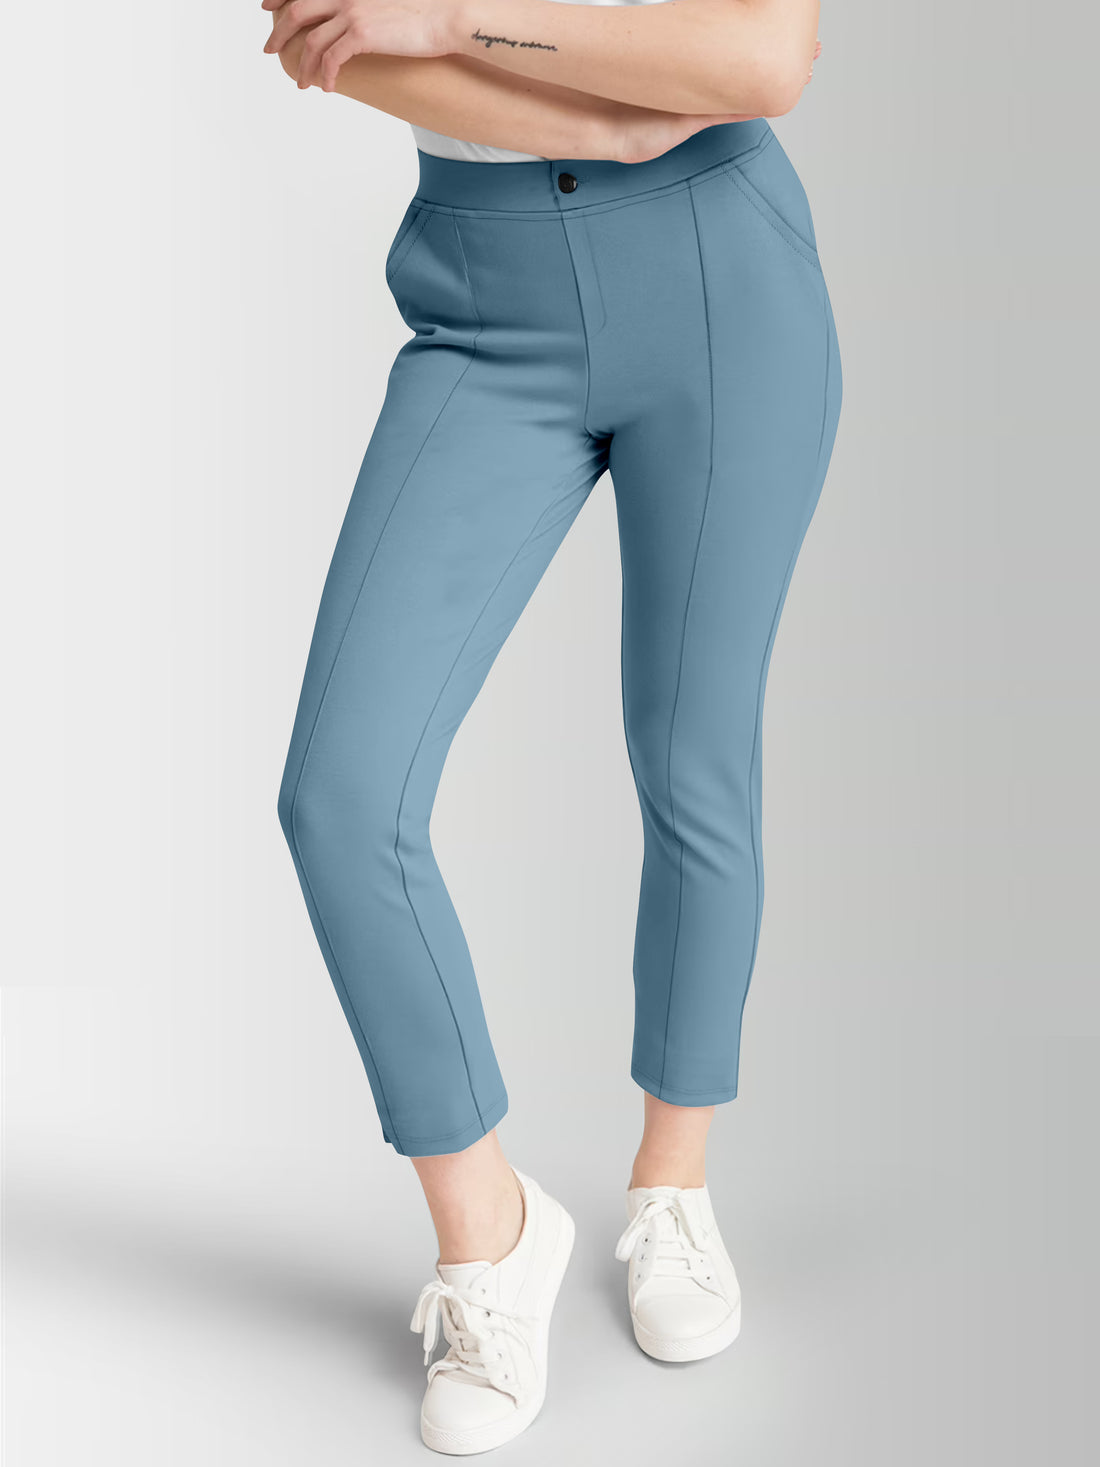 Women's Mint Skinny Fit High Rise Clean Look Regular Length Stretchable Trouser.Track Pant.Jogger.Pant.Body Fit Pent.Formal Trouser.